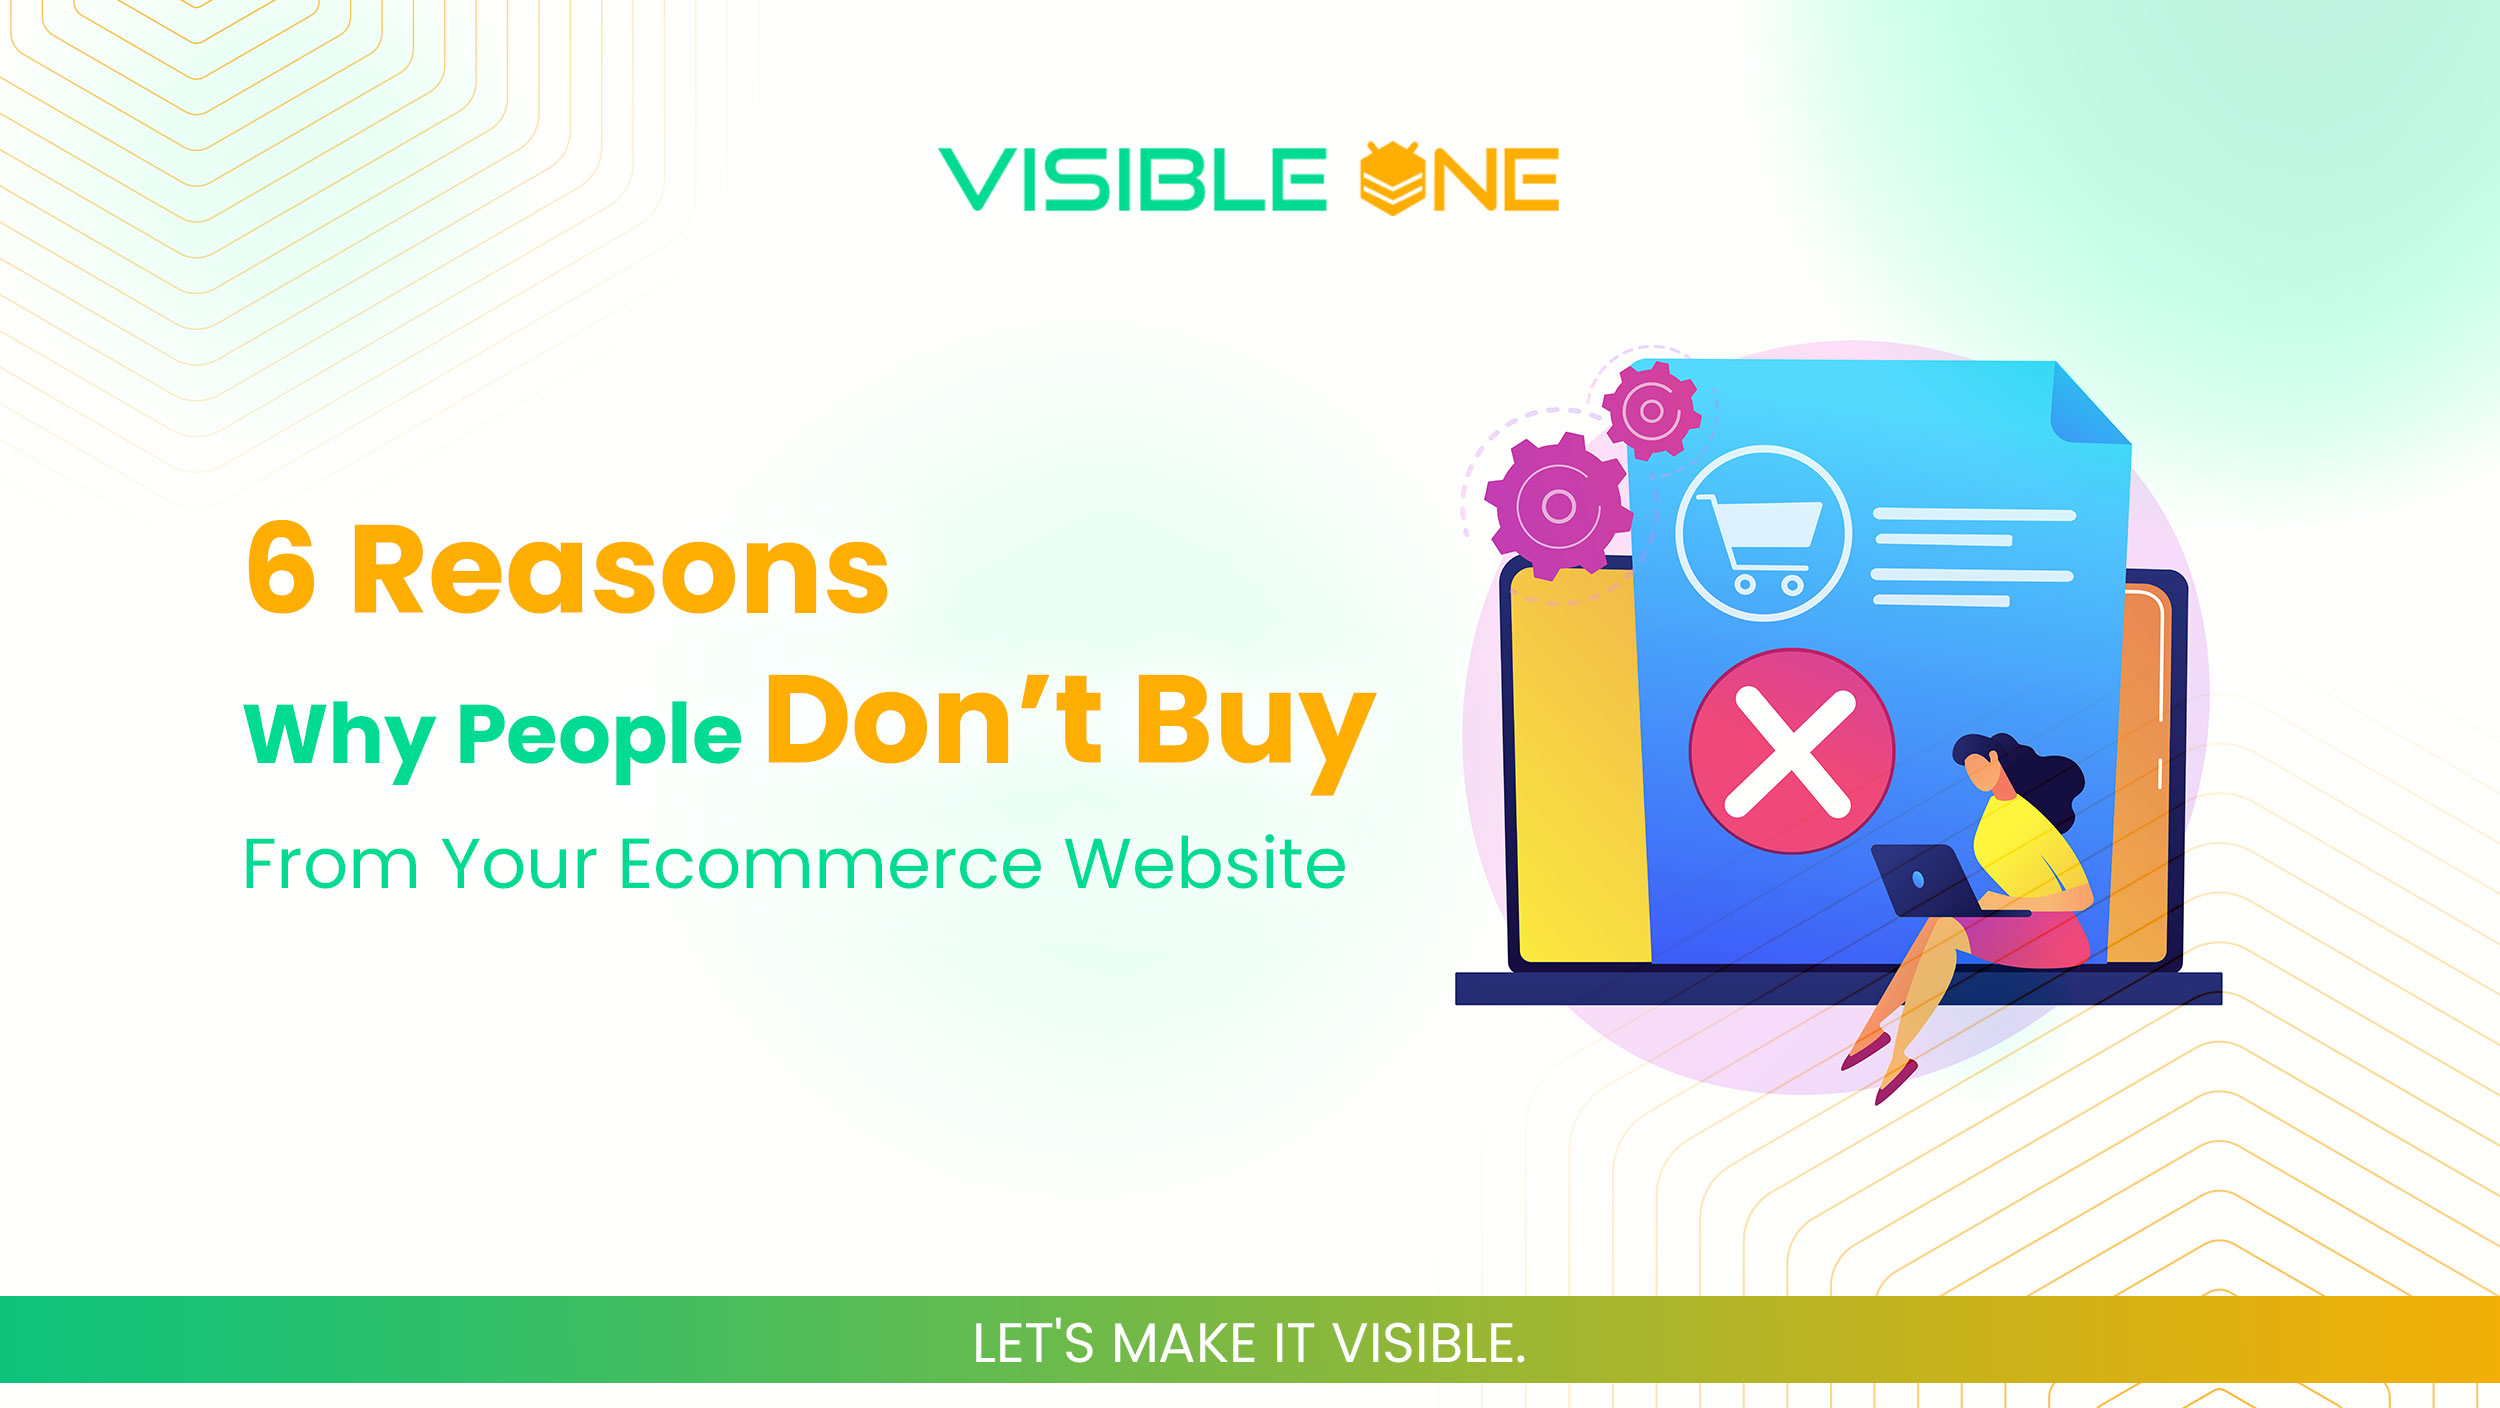 6 Reasons Why People Don’t Buy From Your Ecommerce Website